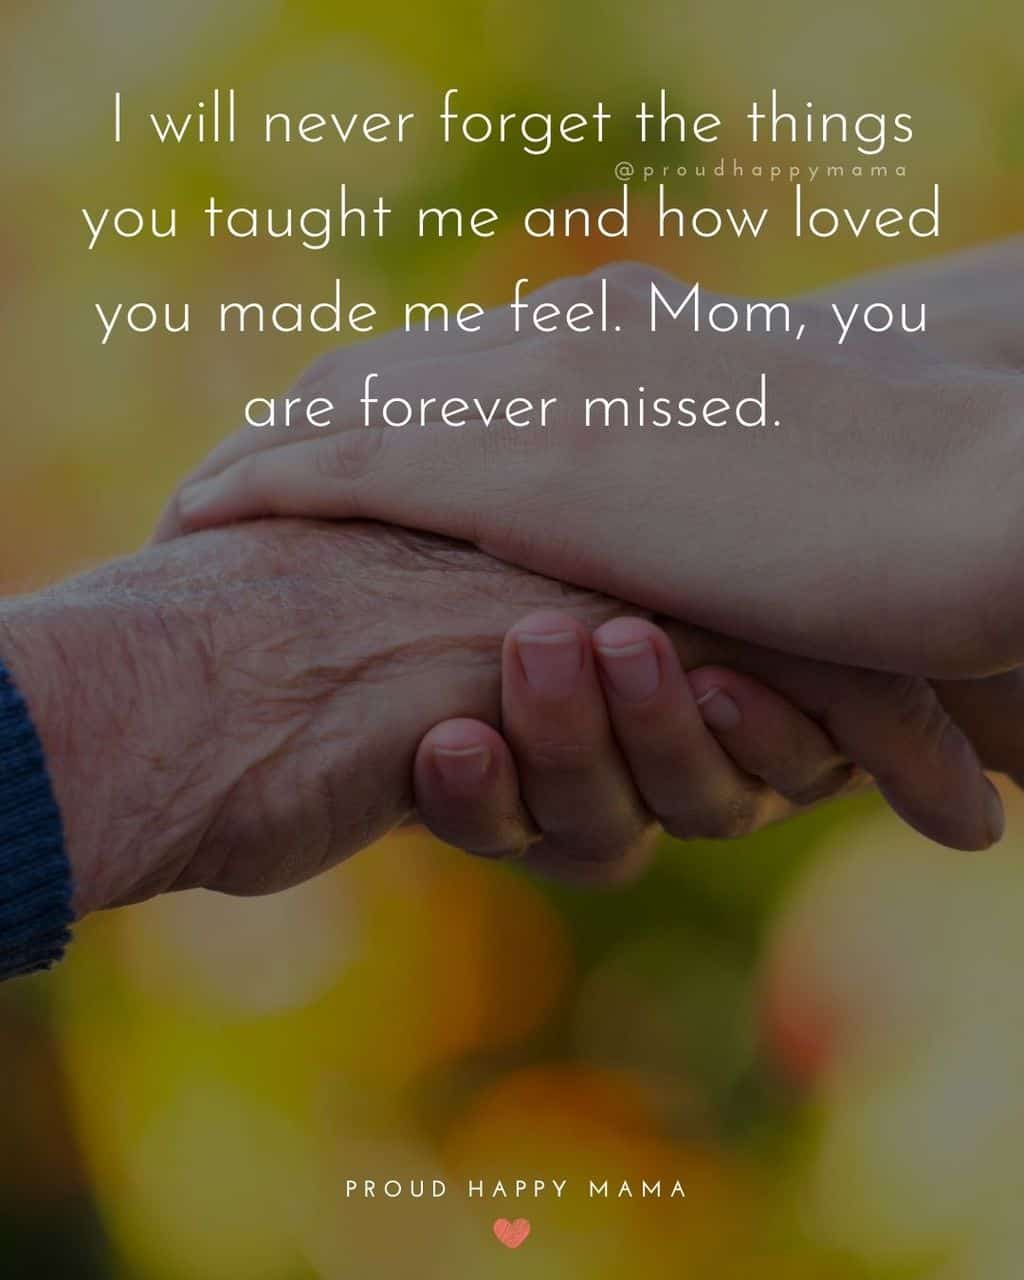 Close up of elderly mother and child holding hand with text overlay, ‘I will never forget the things you taught me and how loved you made me feel. Mom, you are forever missed.’